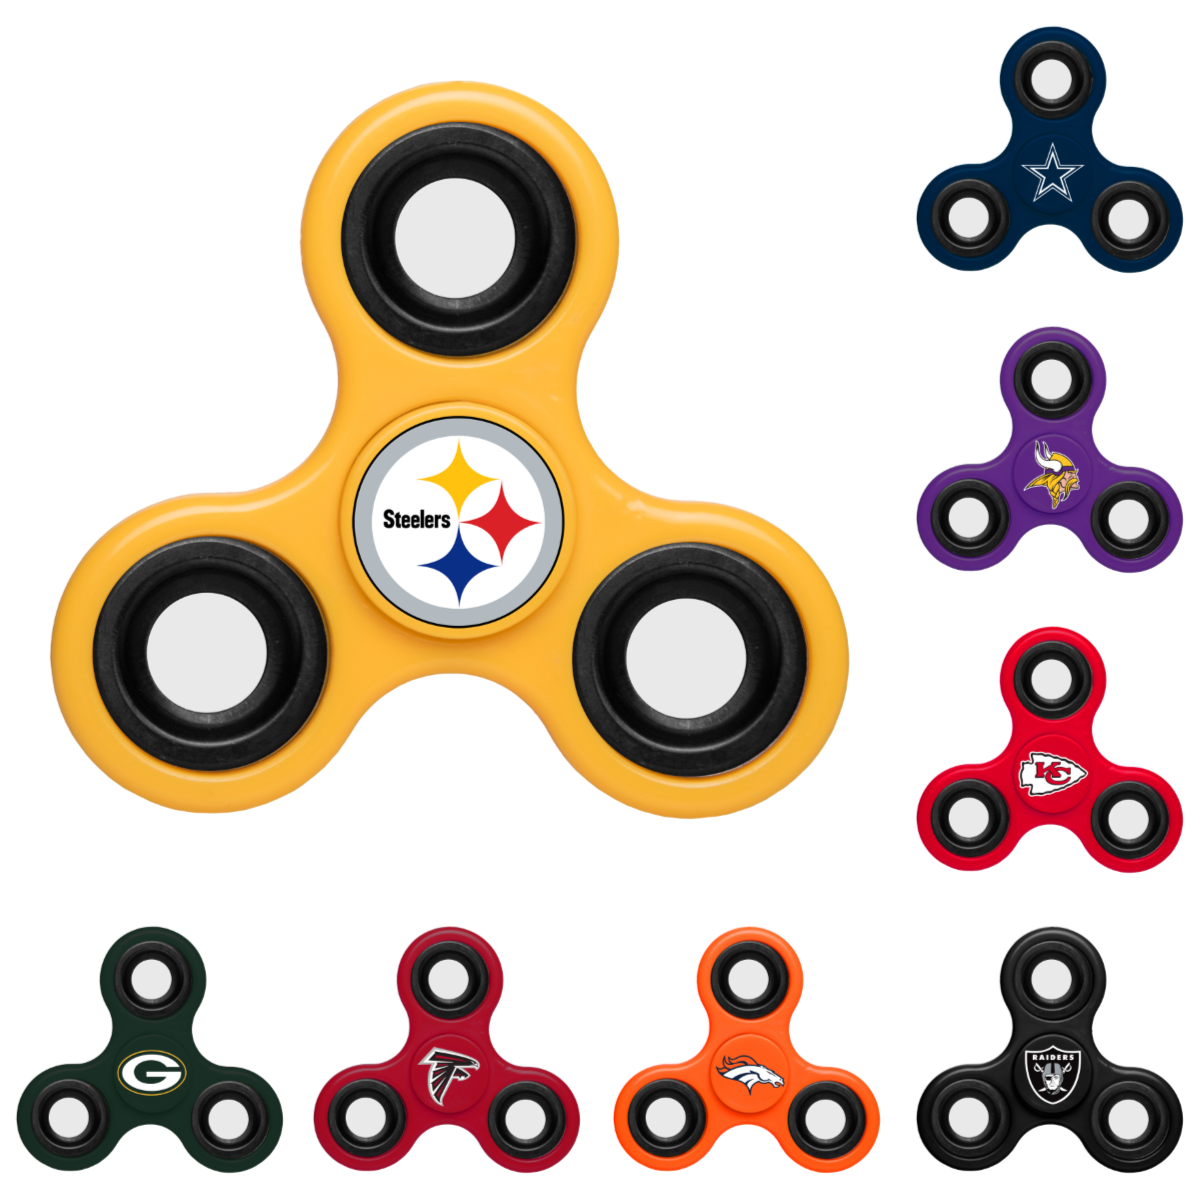 NFL Team Logo 3 Three Way Diztracto Fidget Hand Spinners - Pick Team - IN STOCK FOREVER COLLECTIBLES